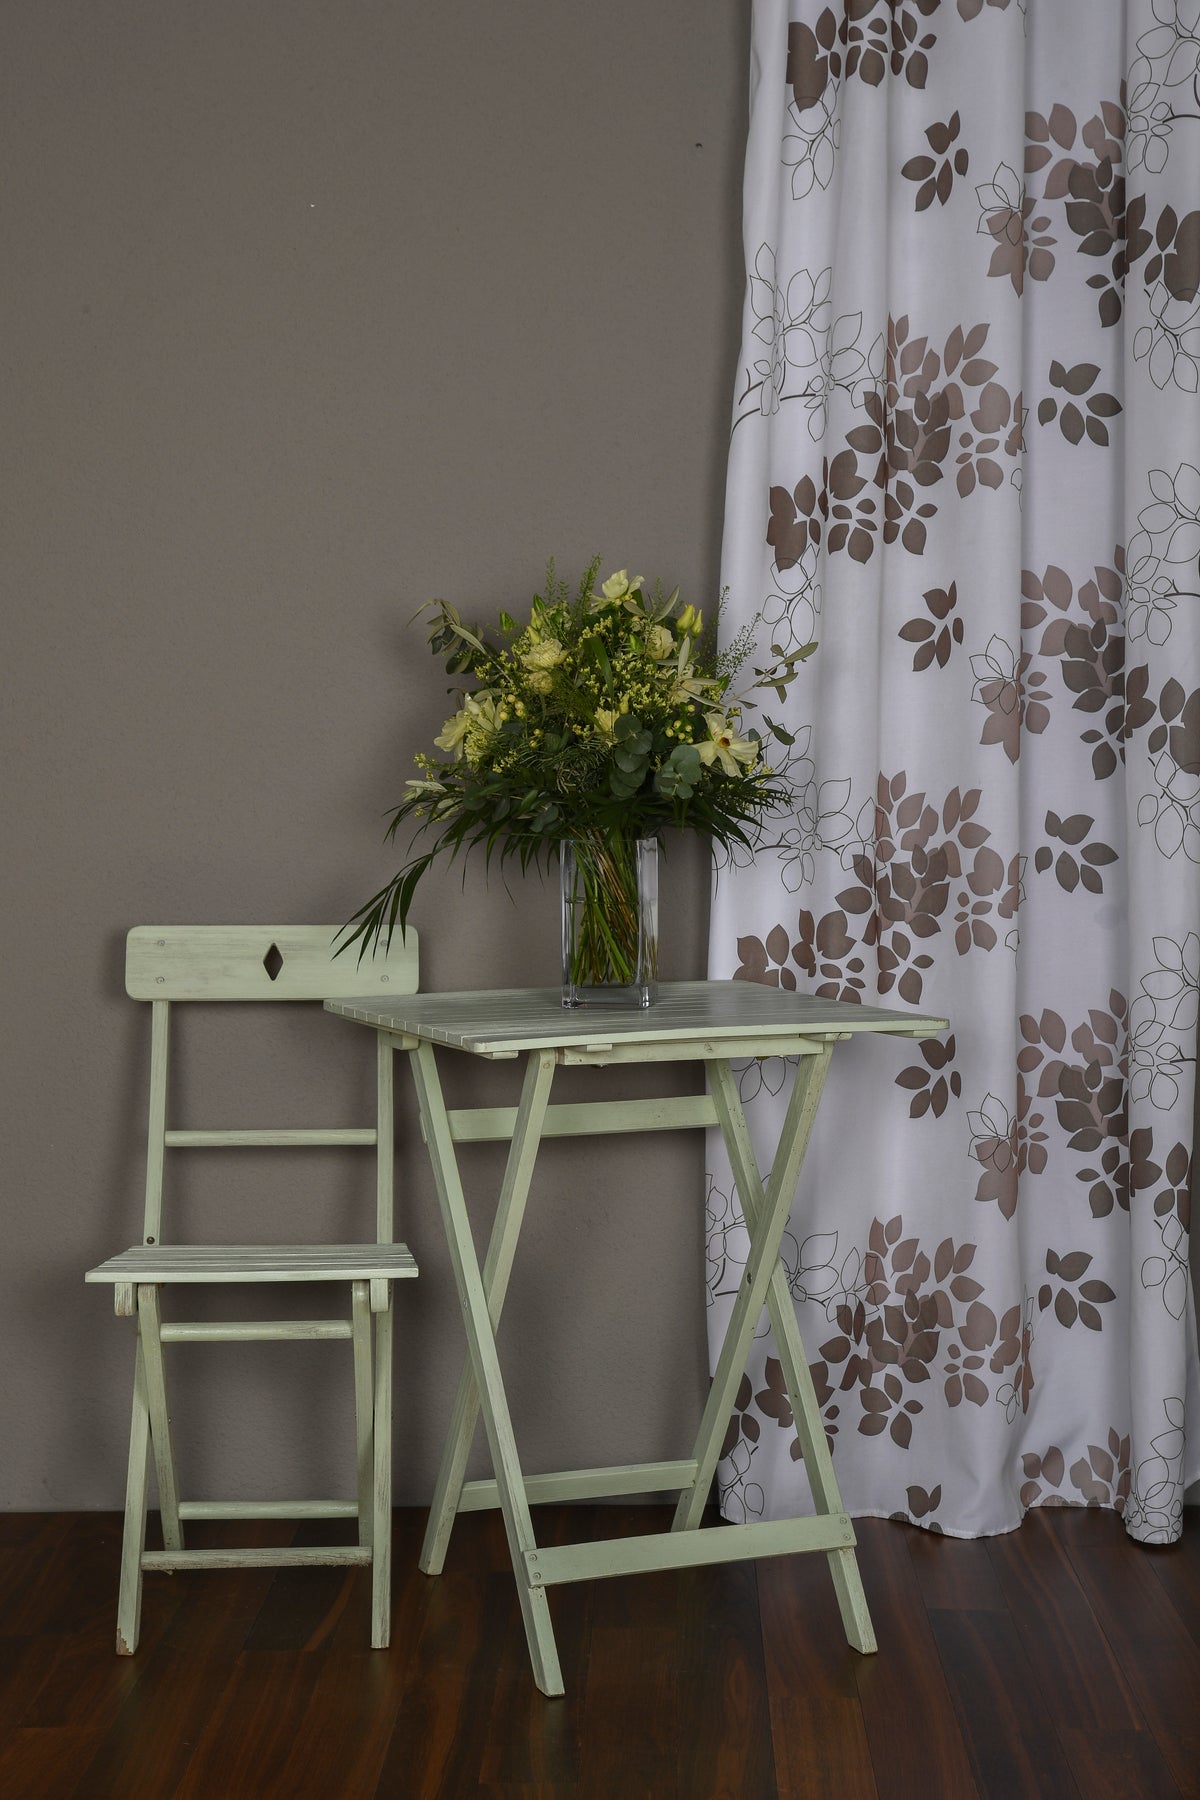 Night curtain taupe candy